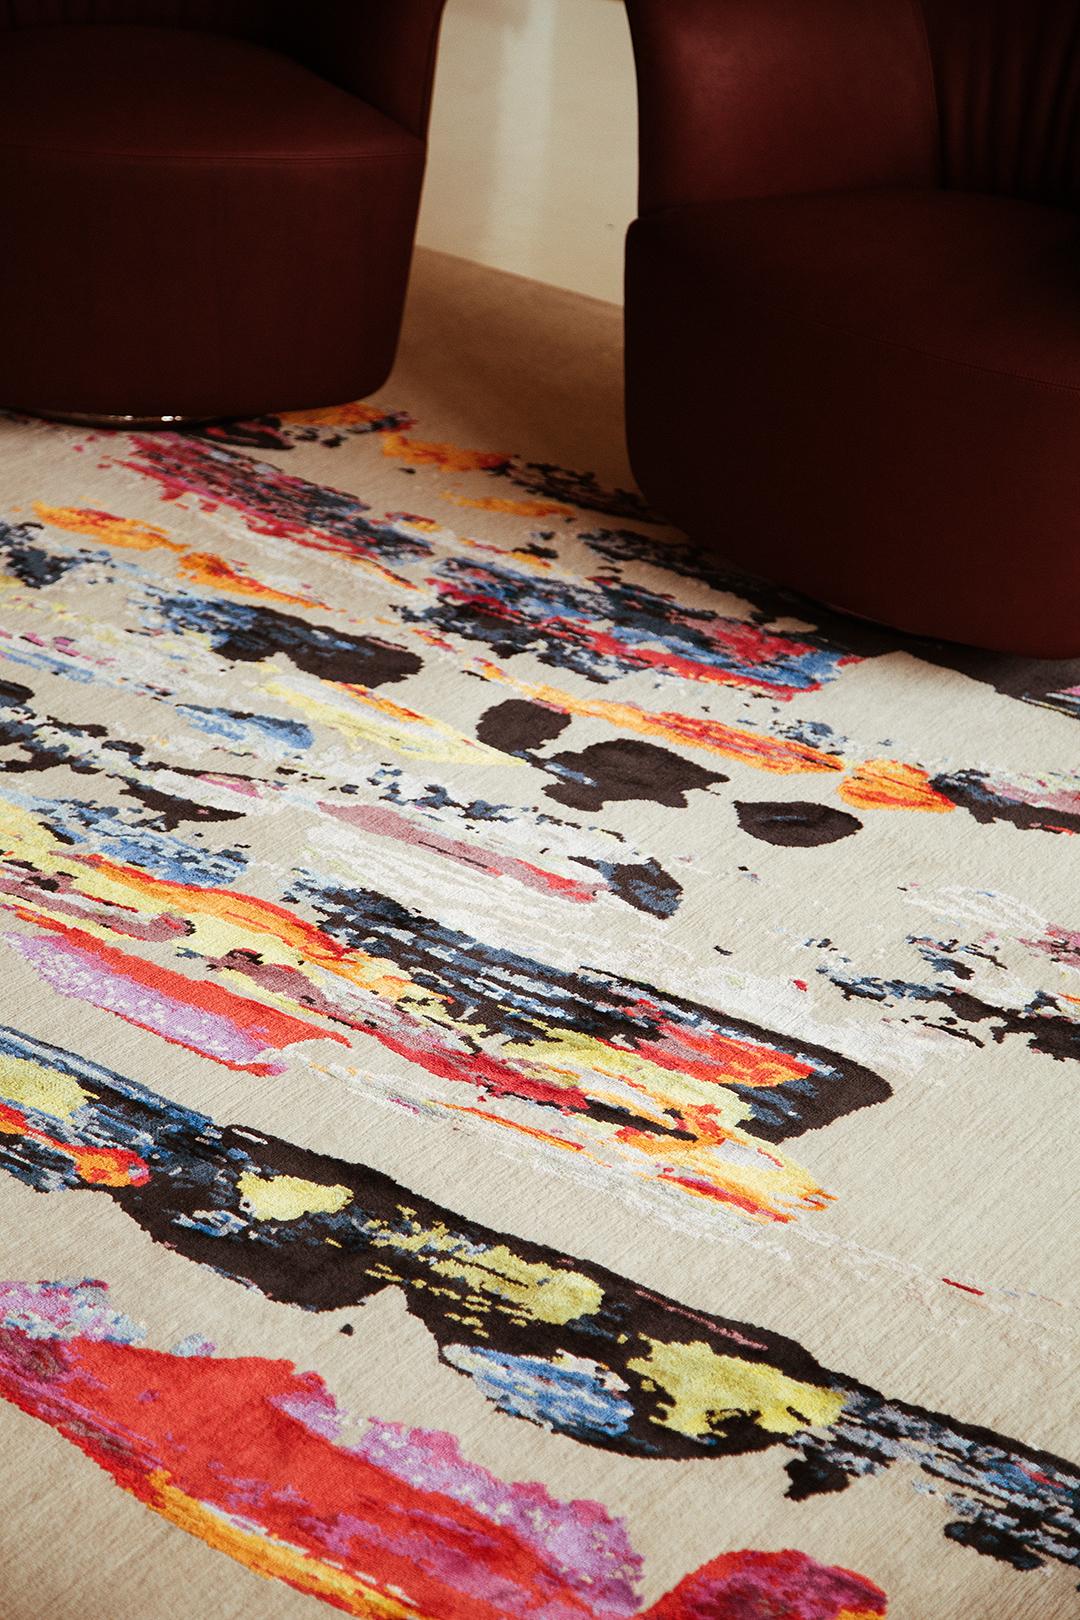 The Bisous Collection by FORM Design Studio

The eight carpets in the collection are inspired by the ways in which human beings express themselves: language, poetry, art, and architecture. Bisous is intended as a celebration--an exultation--shared